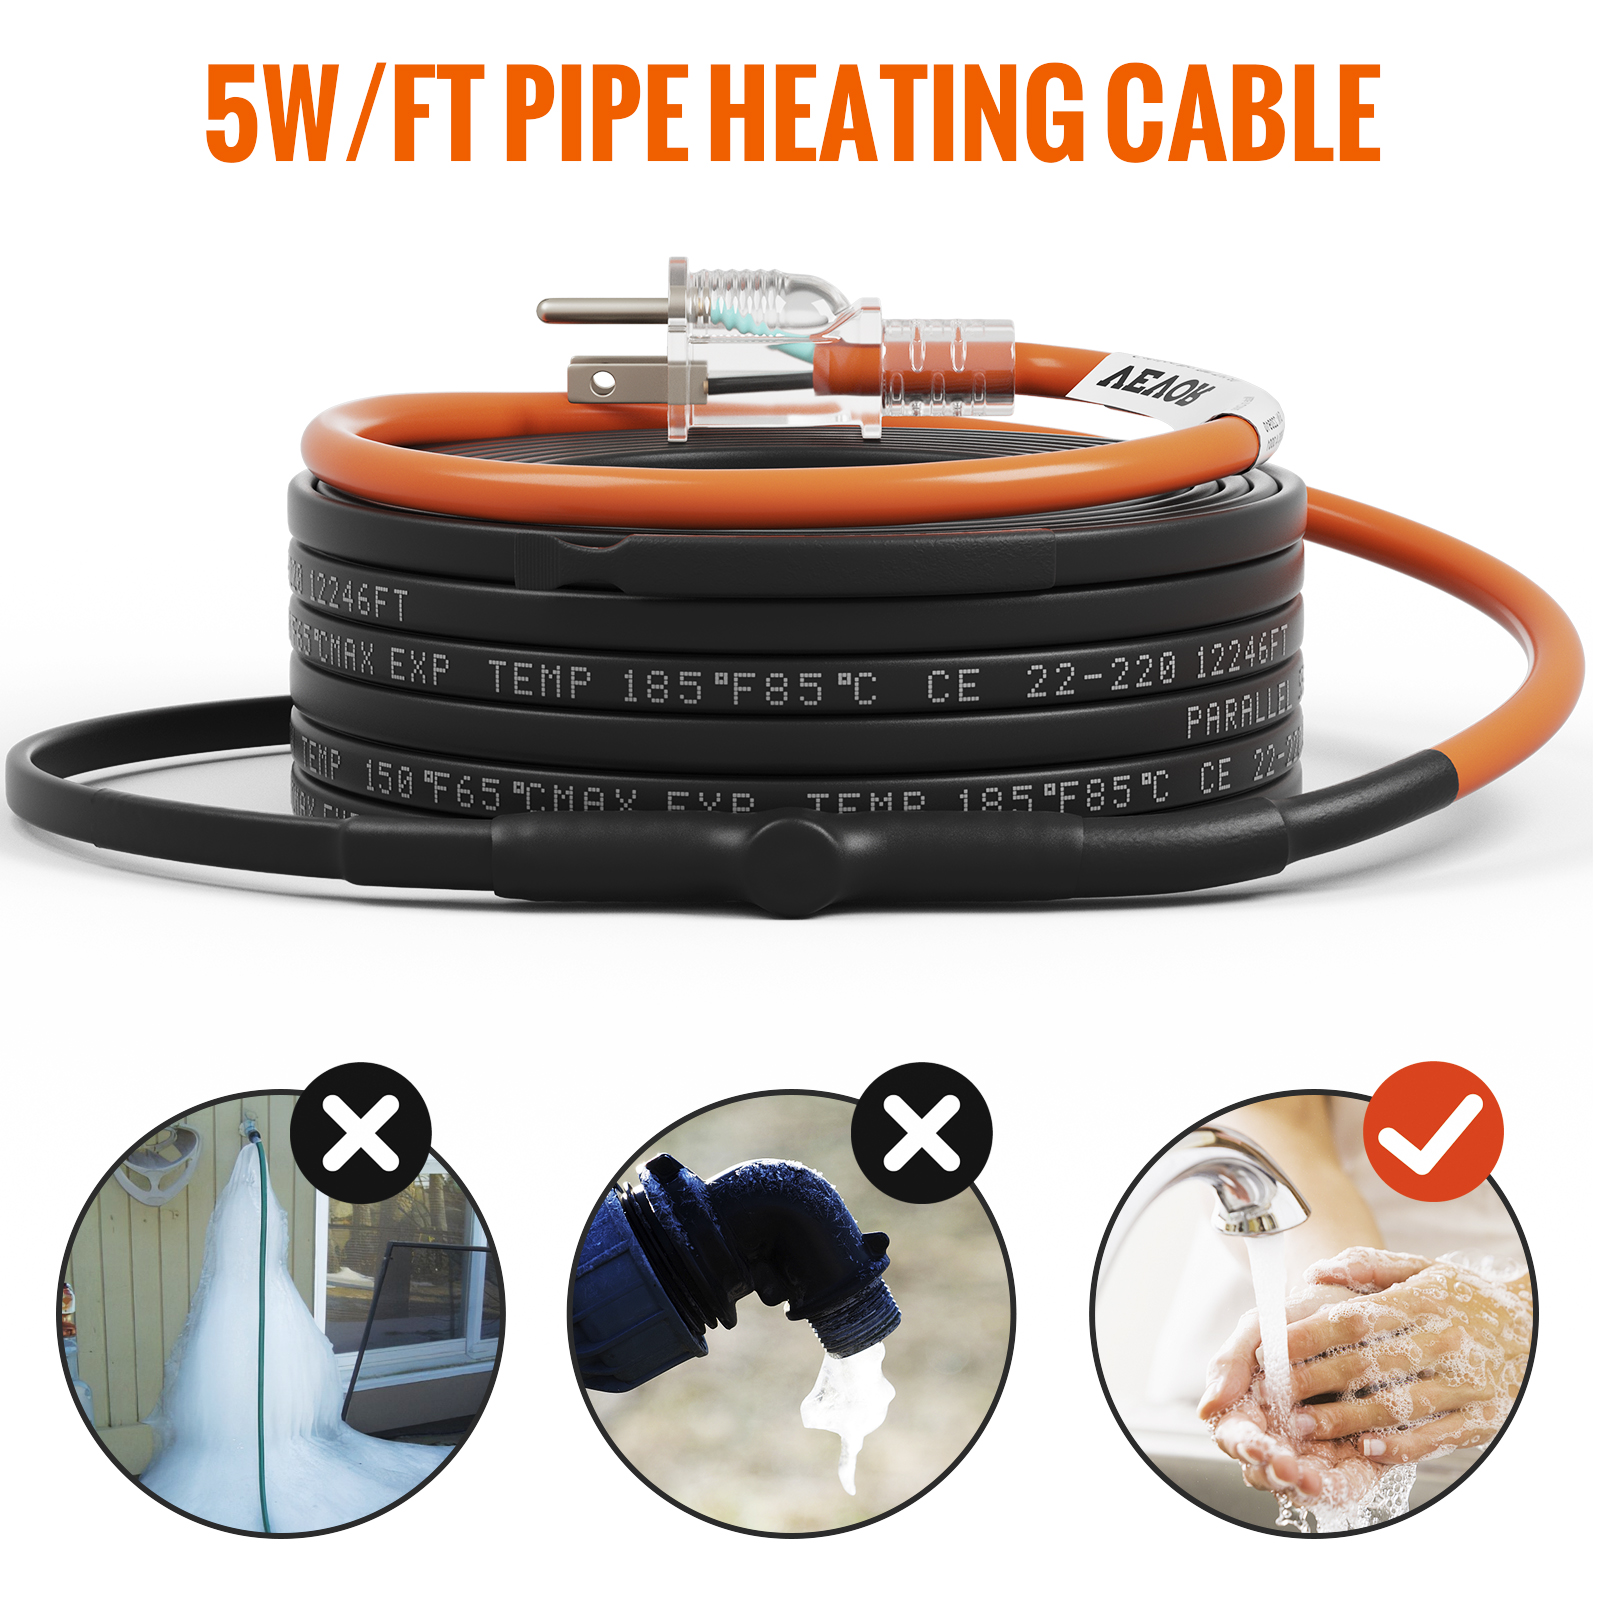 Heat Tape for Pipes- PipeFreeze PRO – Heat Cable Store